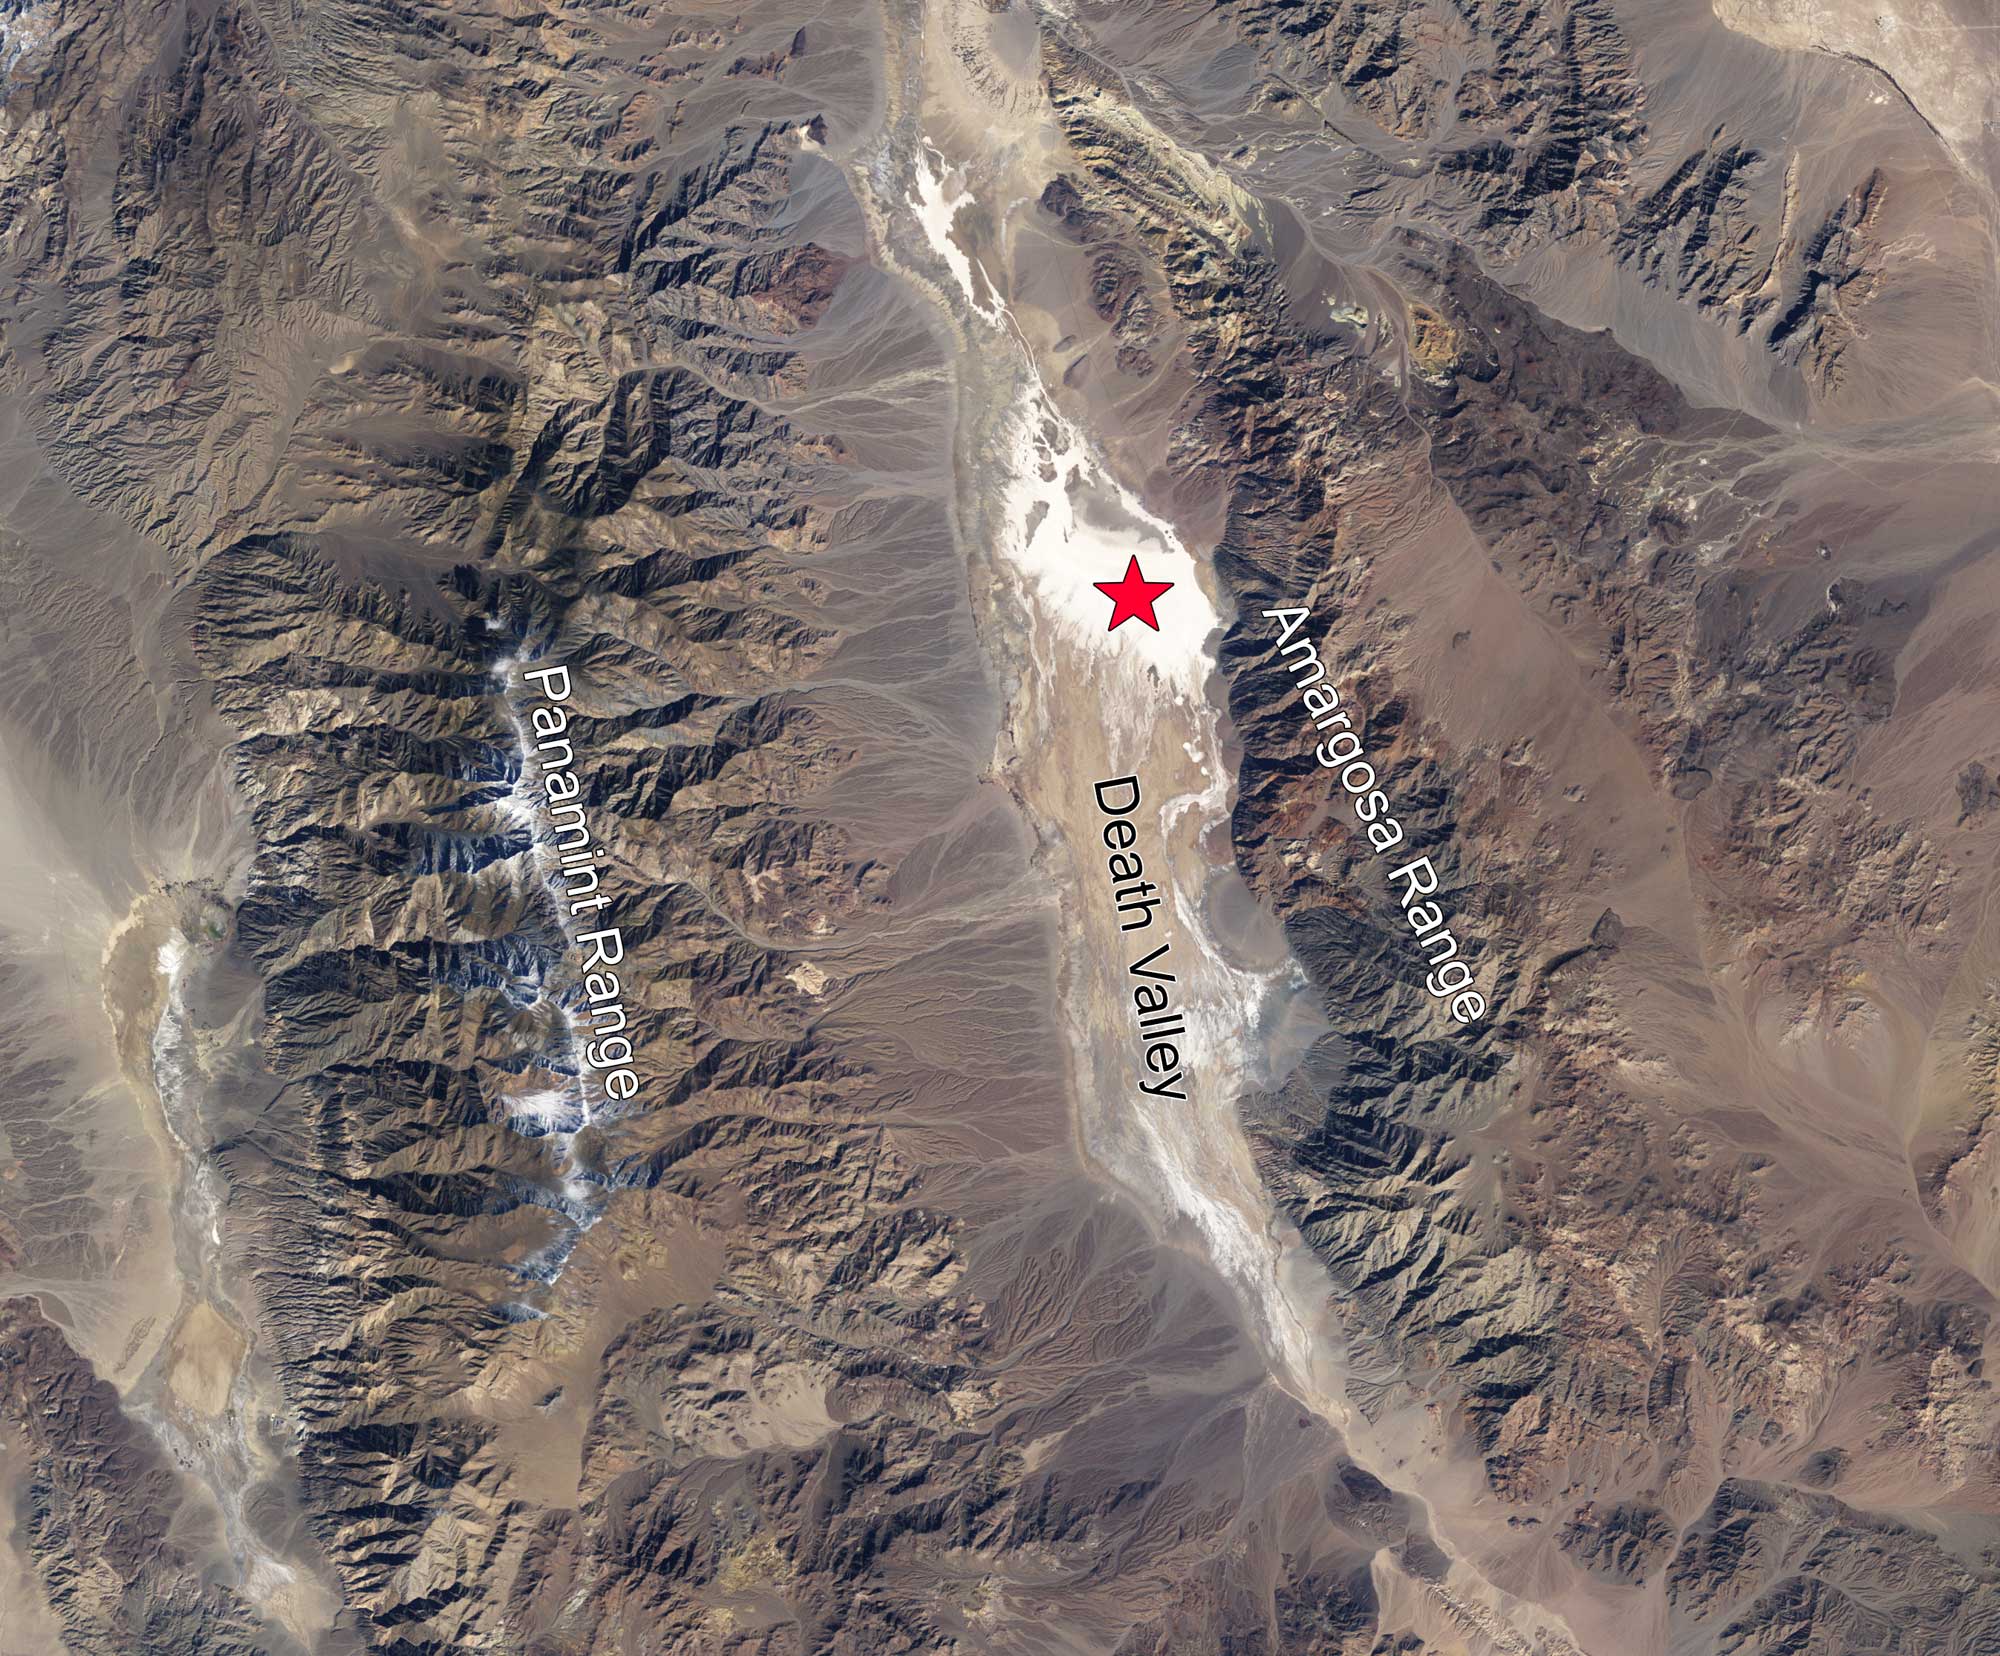 Satellite photo of Death Valley, California. The photo shows the valley running vertically from the top to the bottom of the image, with the Panamint Range to the west and the Amargosa Range to the east. The Badwater Basin, the lowest region in Death Valley, is marked with a red star.